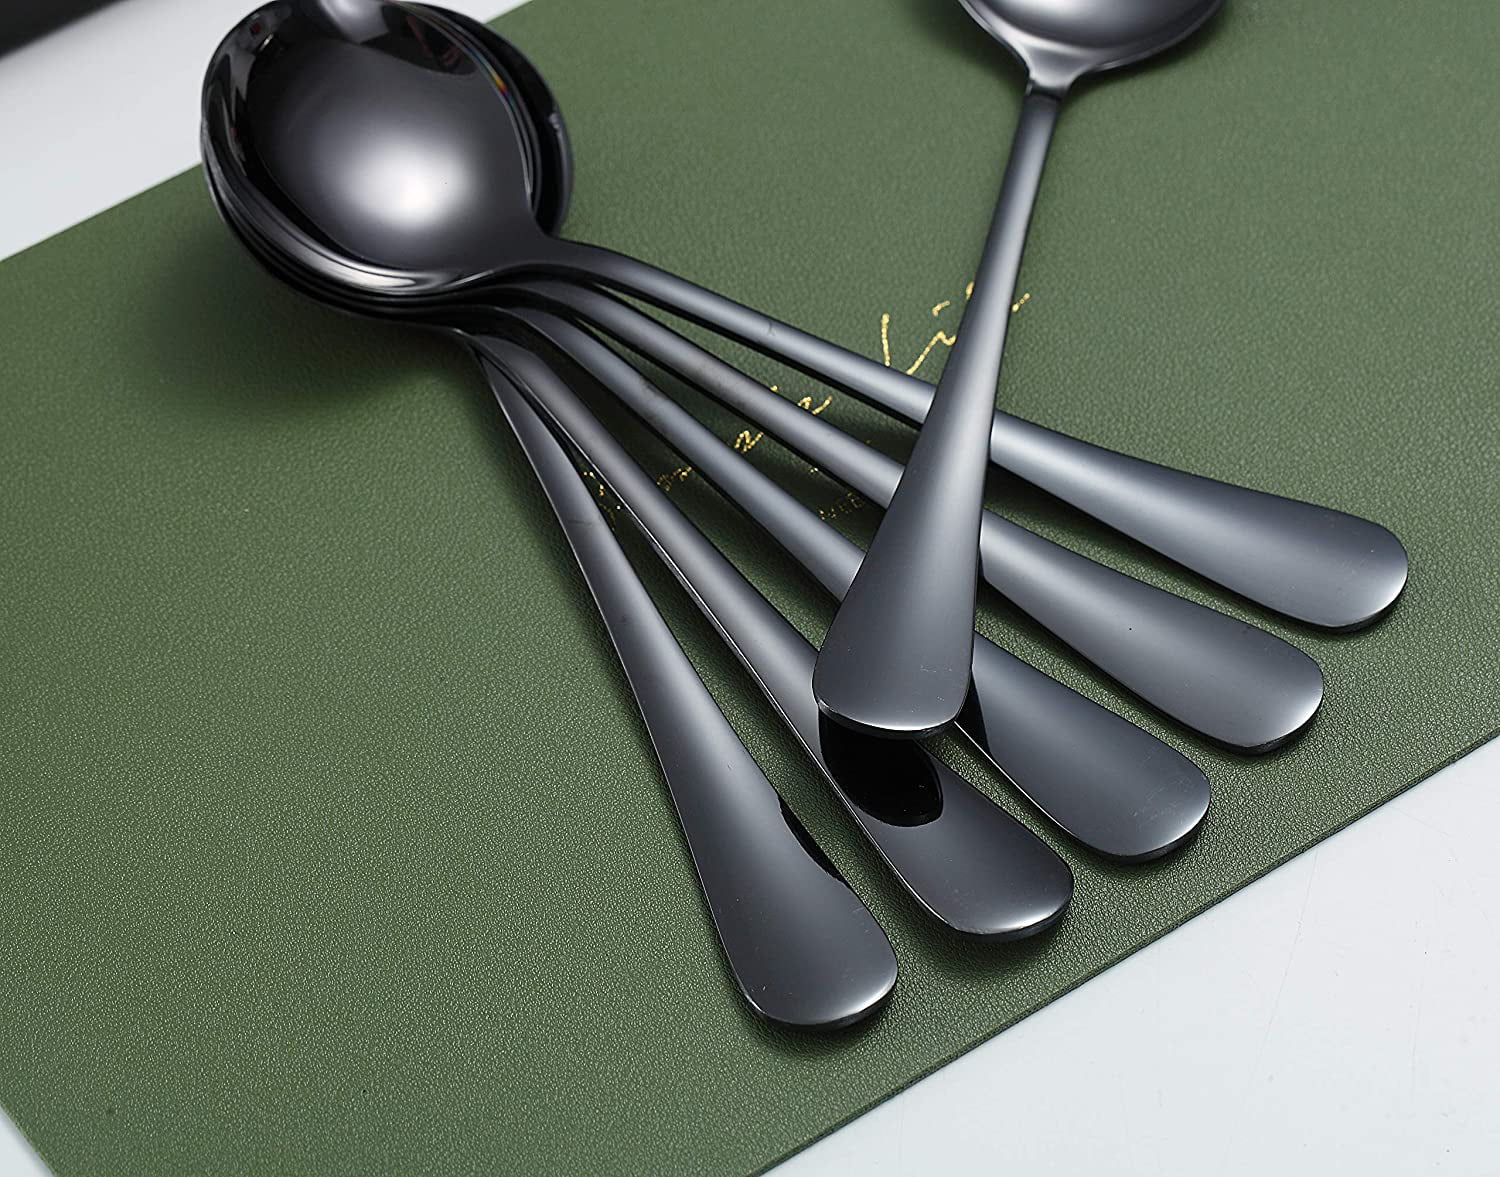 Our Table™ Metal Cooking Spoon - Black, 1 ct - Fry's Food Stores